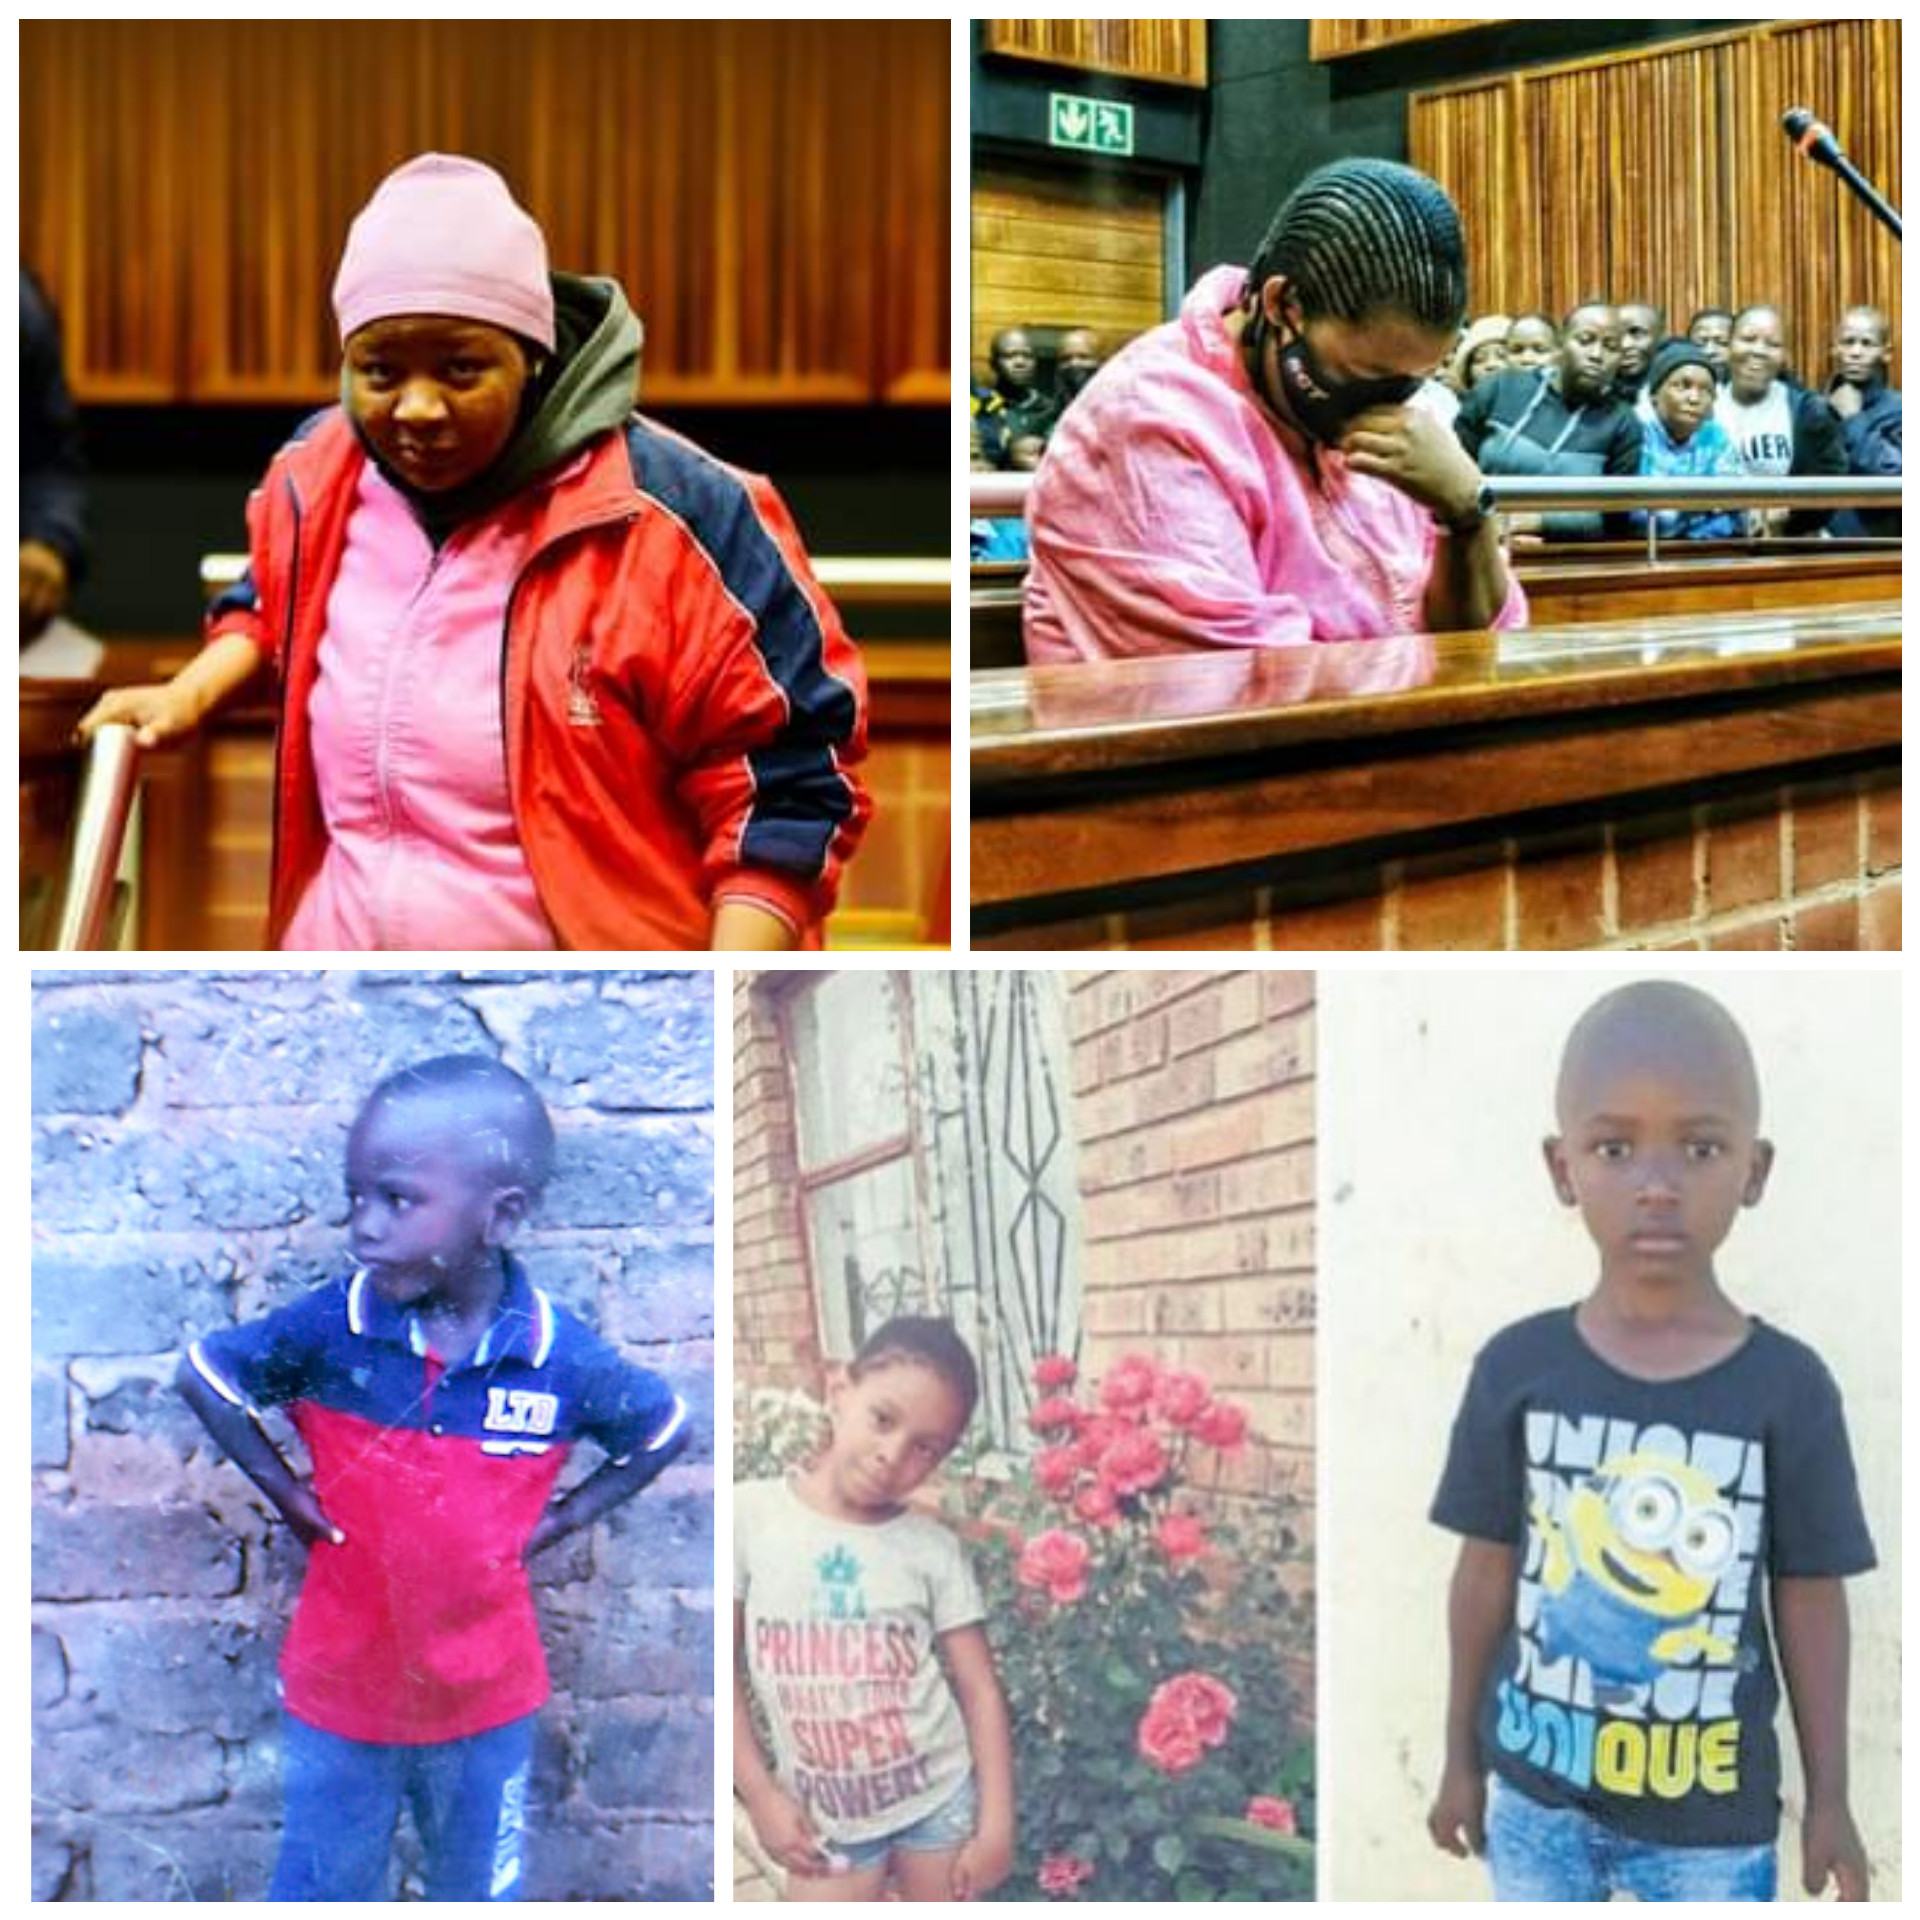 Woman handed three life sentences for killing 3 children in South Africa